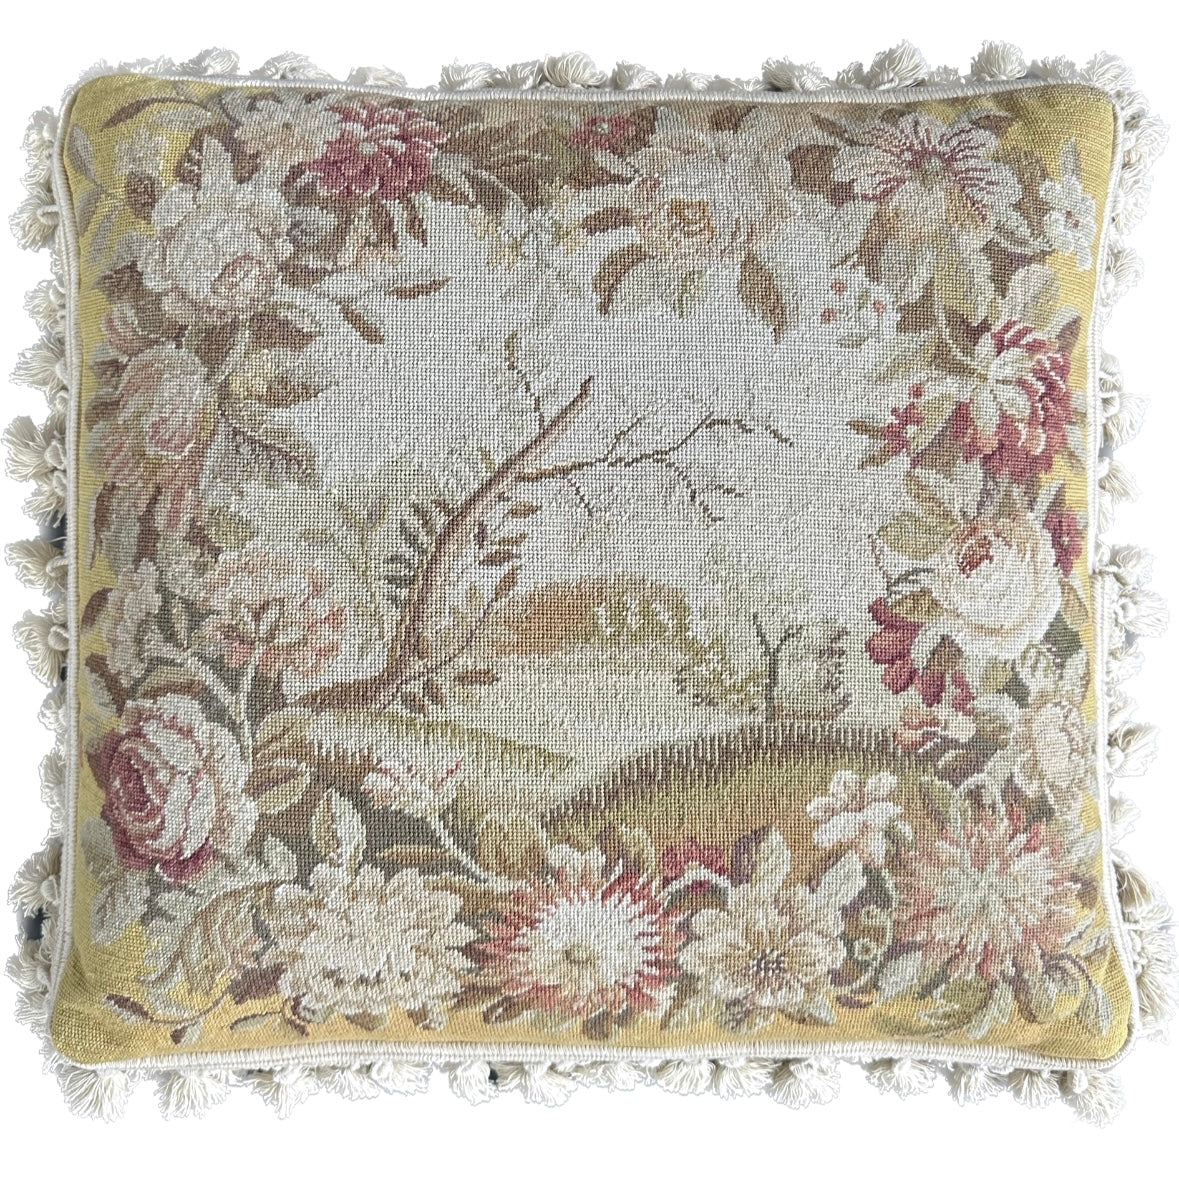 20" x 20" Yellow and Beige Botanical Floral Needlepoint Pillow